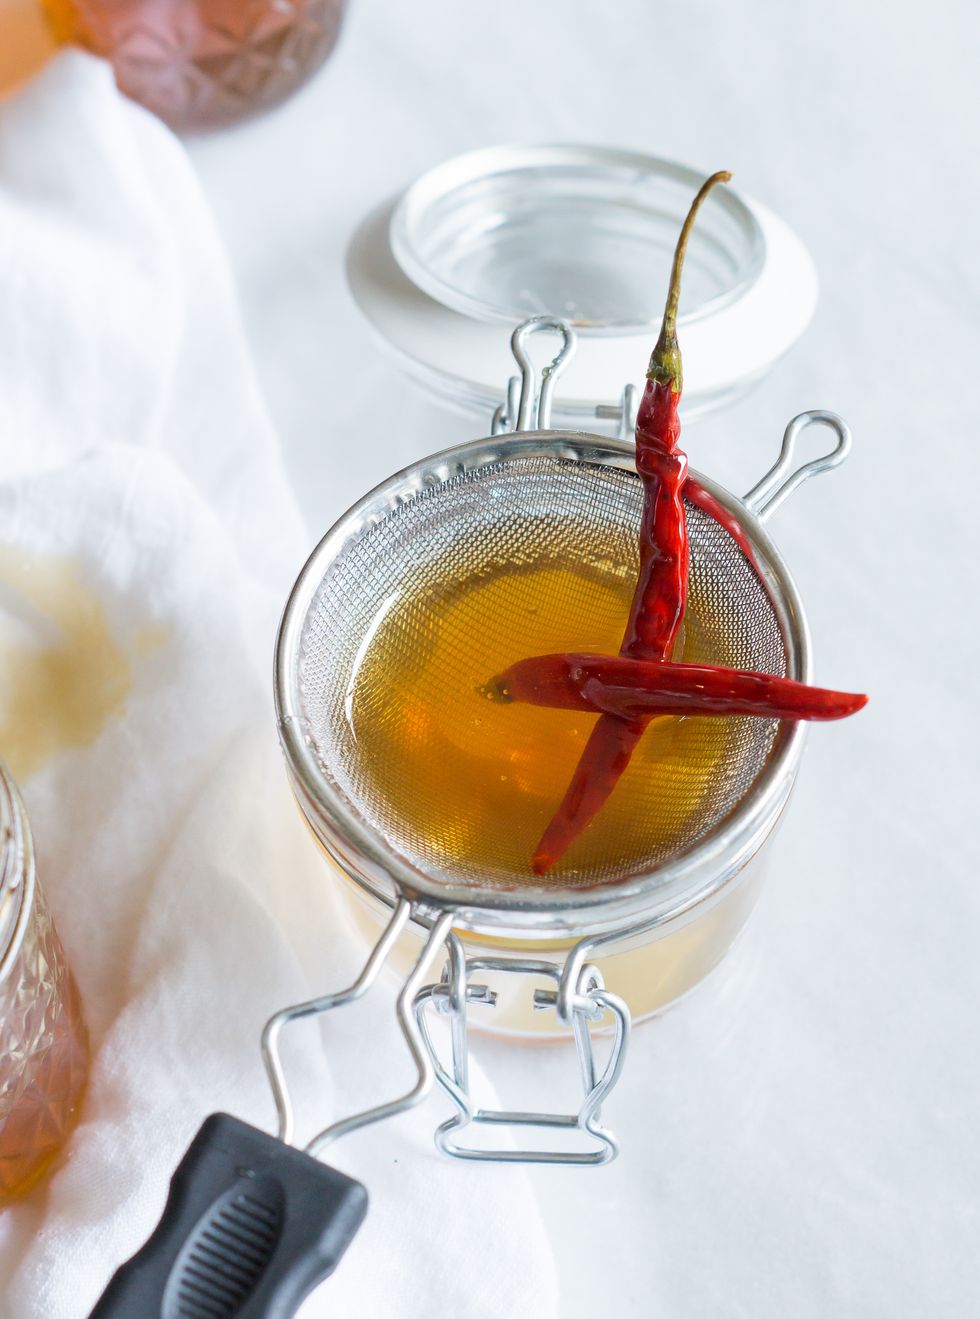 How to Infuse Honey 2 chile vert